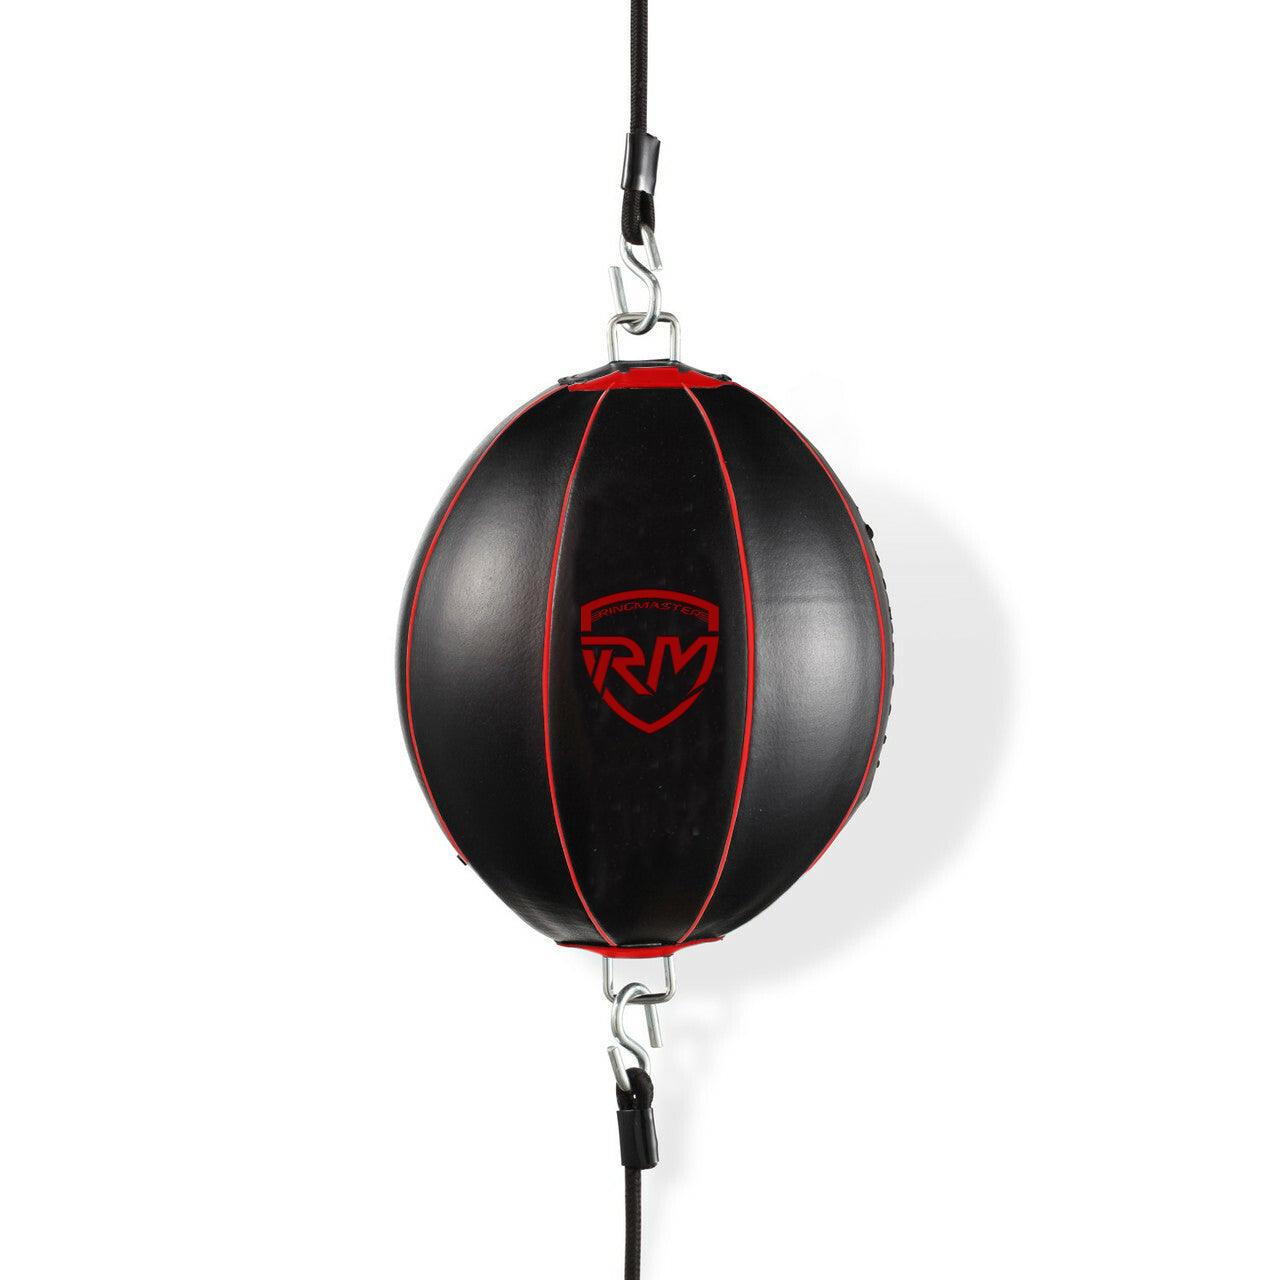 RingMaster Sports Double End Round Speed Ball BoxR Series Synthetic Leather Red/Black - RINGMASTER SPORTS - Made For Champions